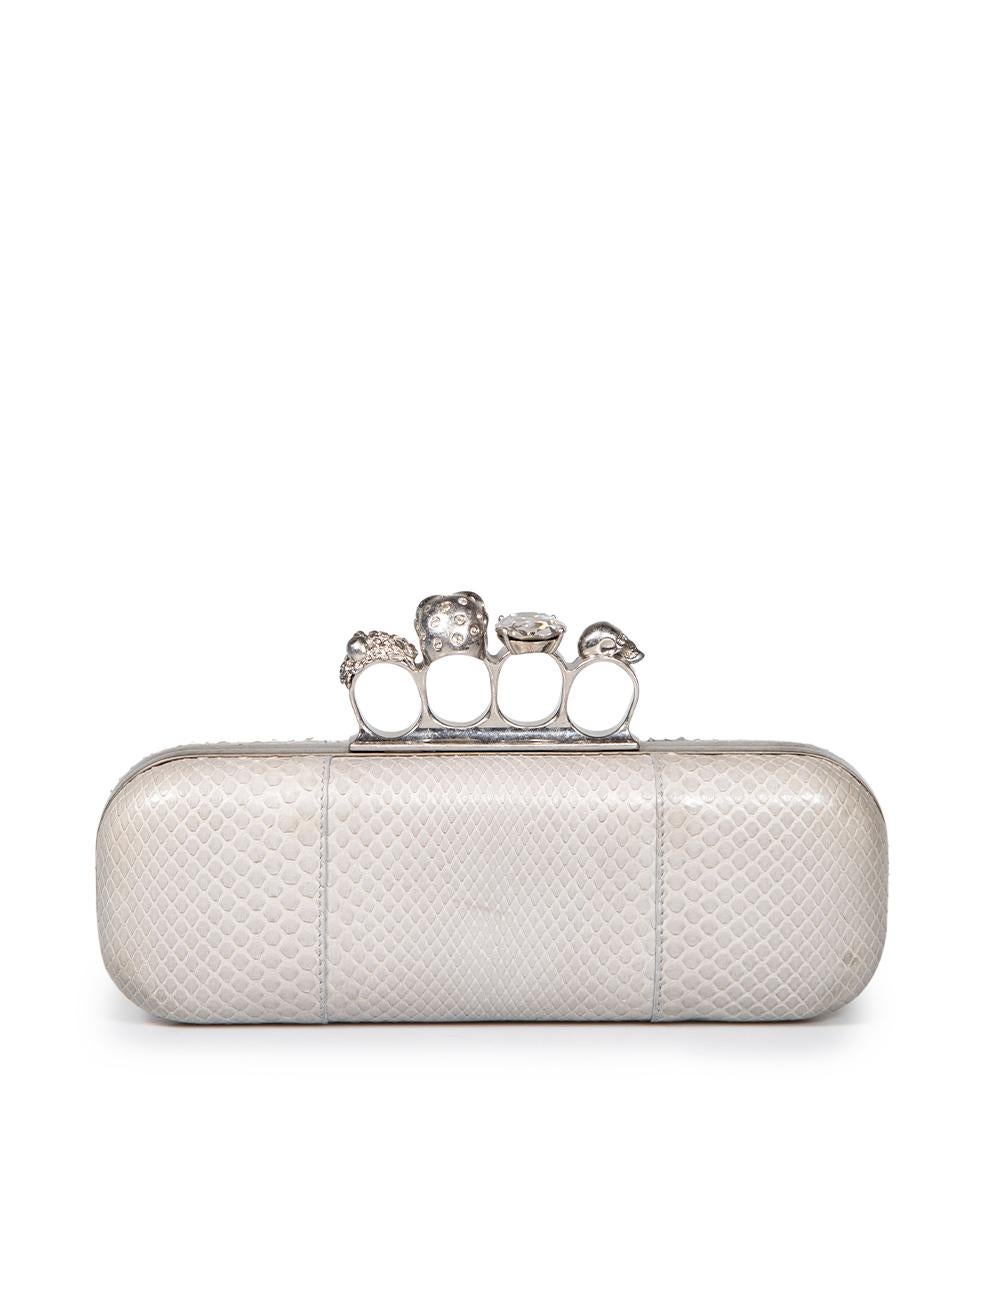 Alexander McQueen Grey Snakeskin Knuckle Clutch In Excellent Condition For Sale In London, GB